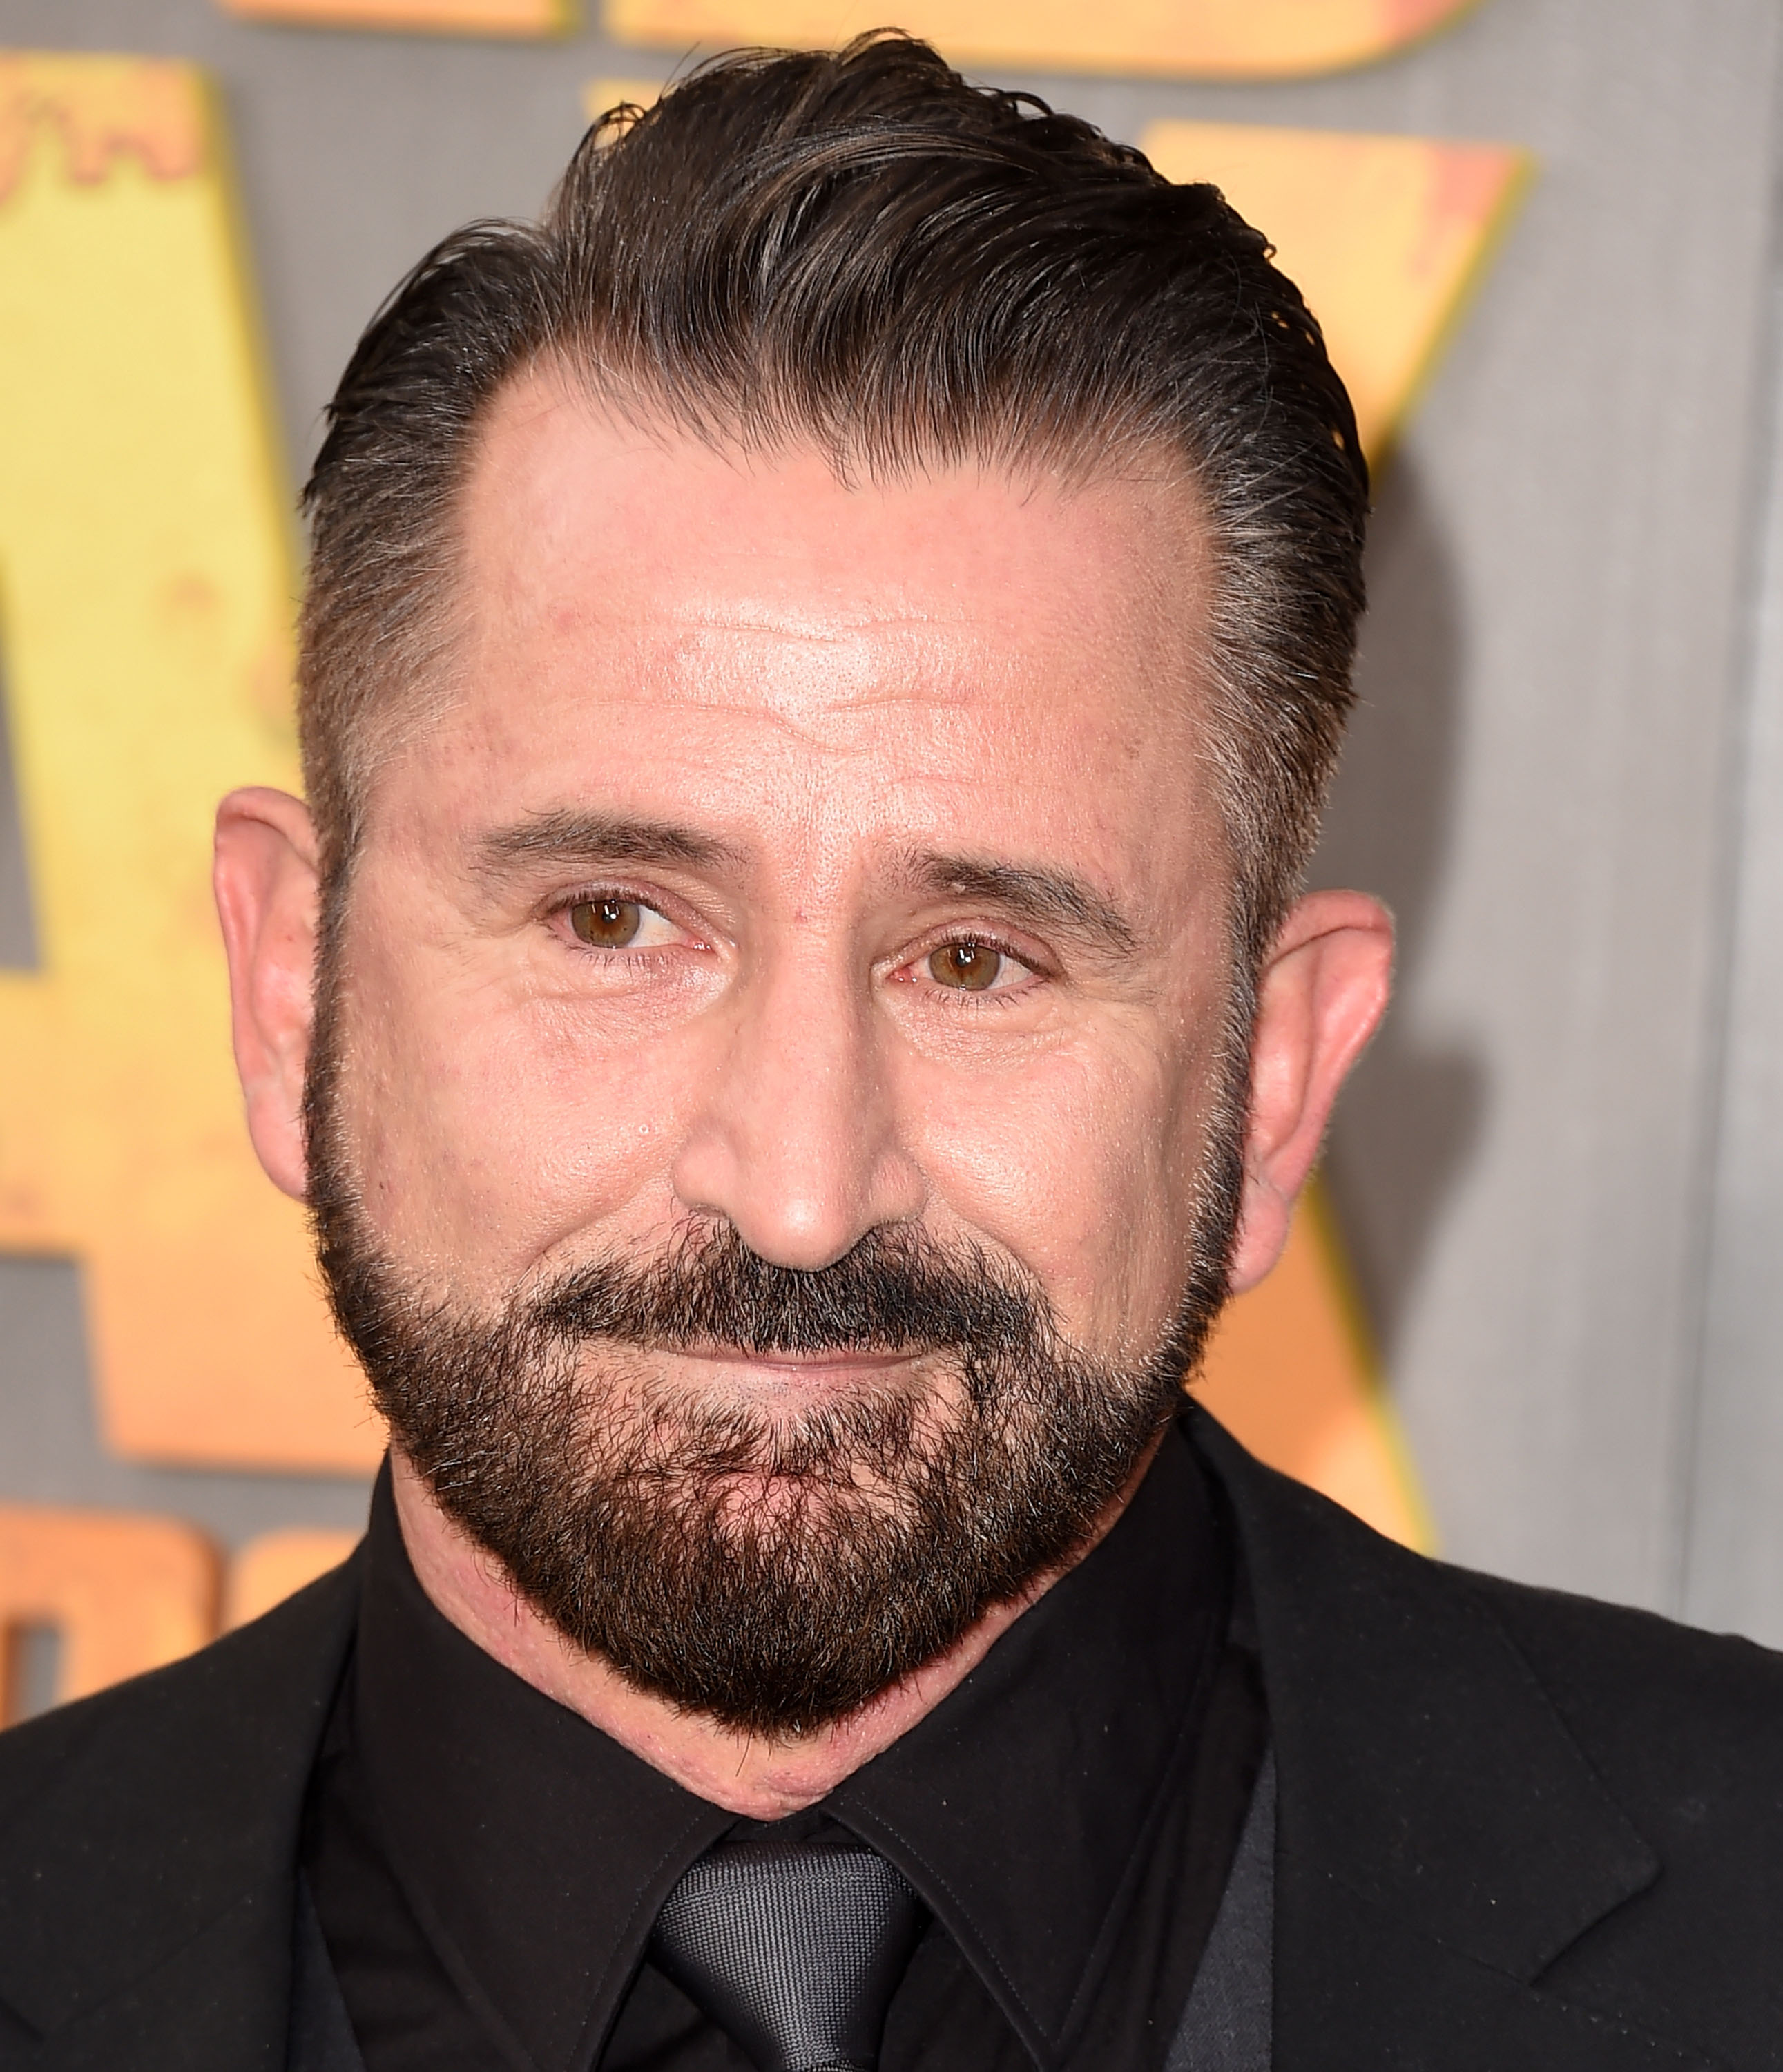 Anthony LaPaglia poses as he arrives at the "Mad Max: Fury Road" Los Angeles Premiere at TCL Chinese Theatre IMAX on May 7, 2015, in Hollywood, California | Sources: Getty Images